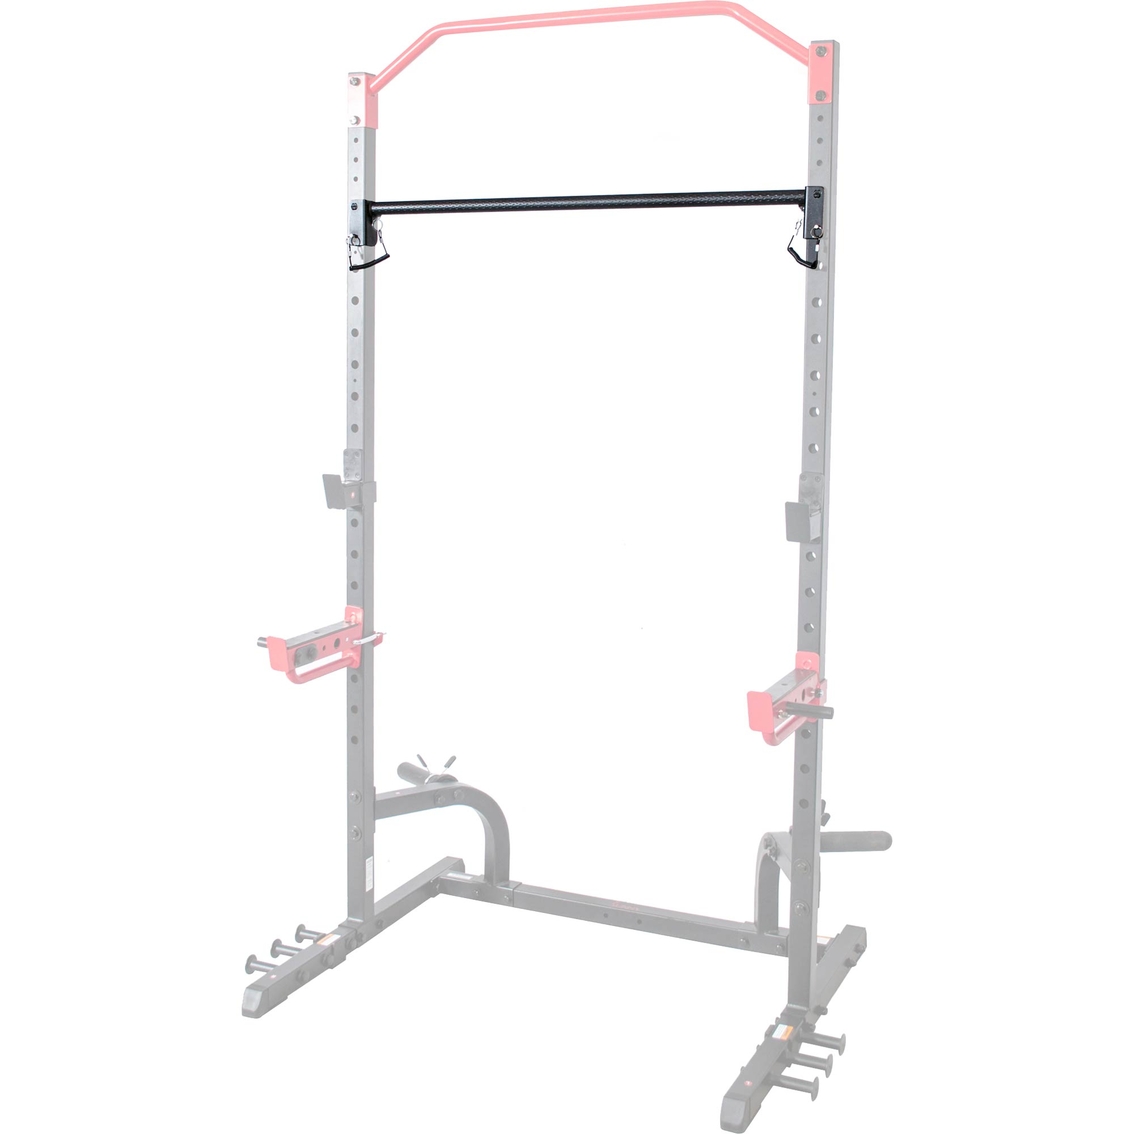 Sunny Health & Fitness Pull Up Bar Attachment for Power Racks and Cages - Image 7 of 8